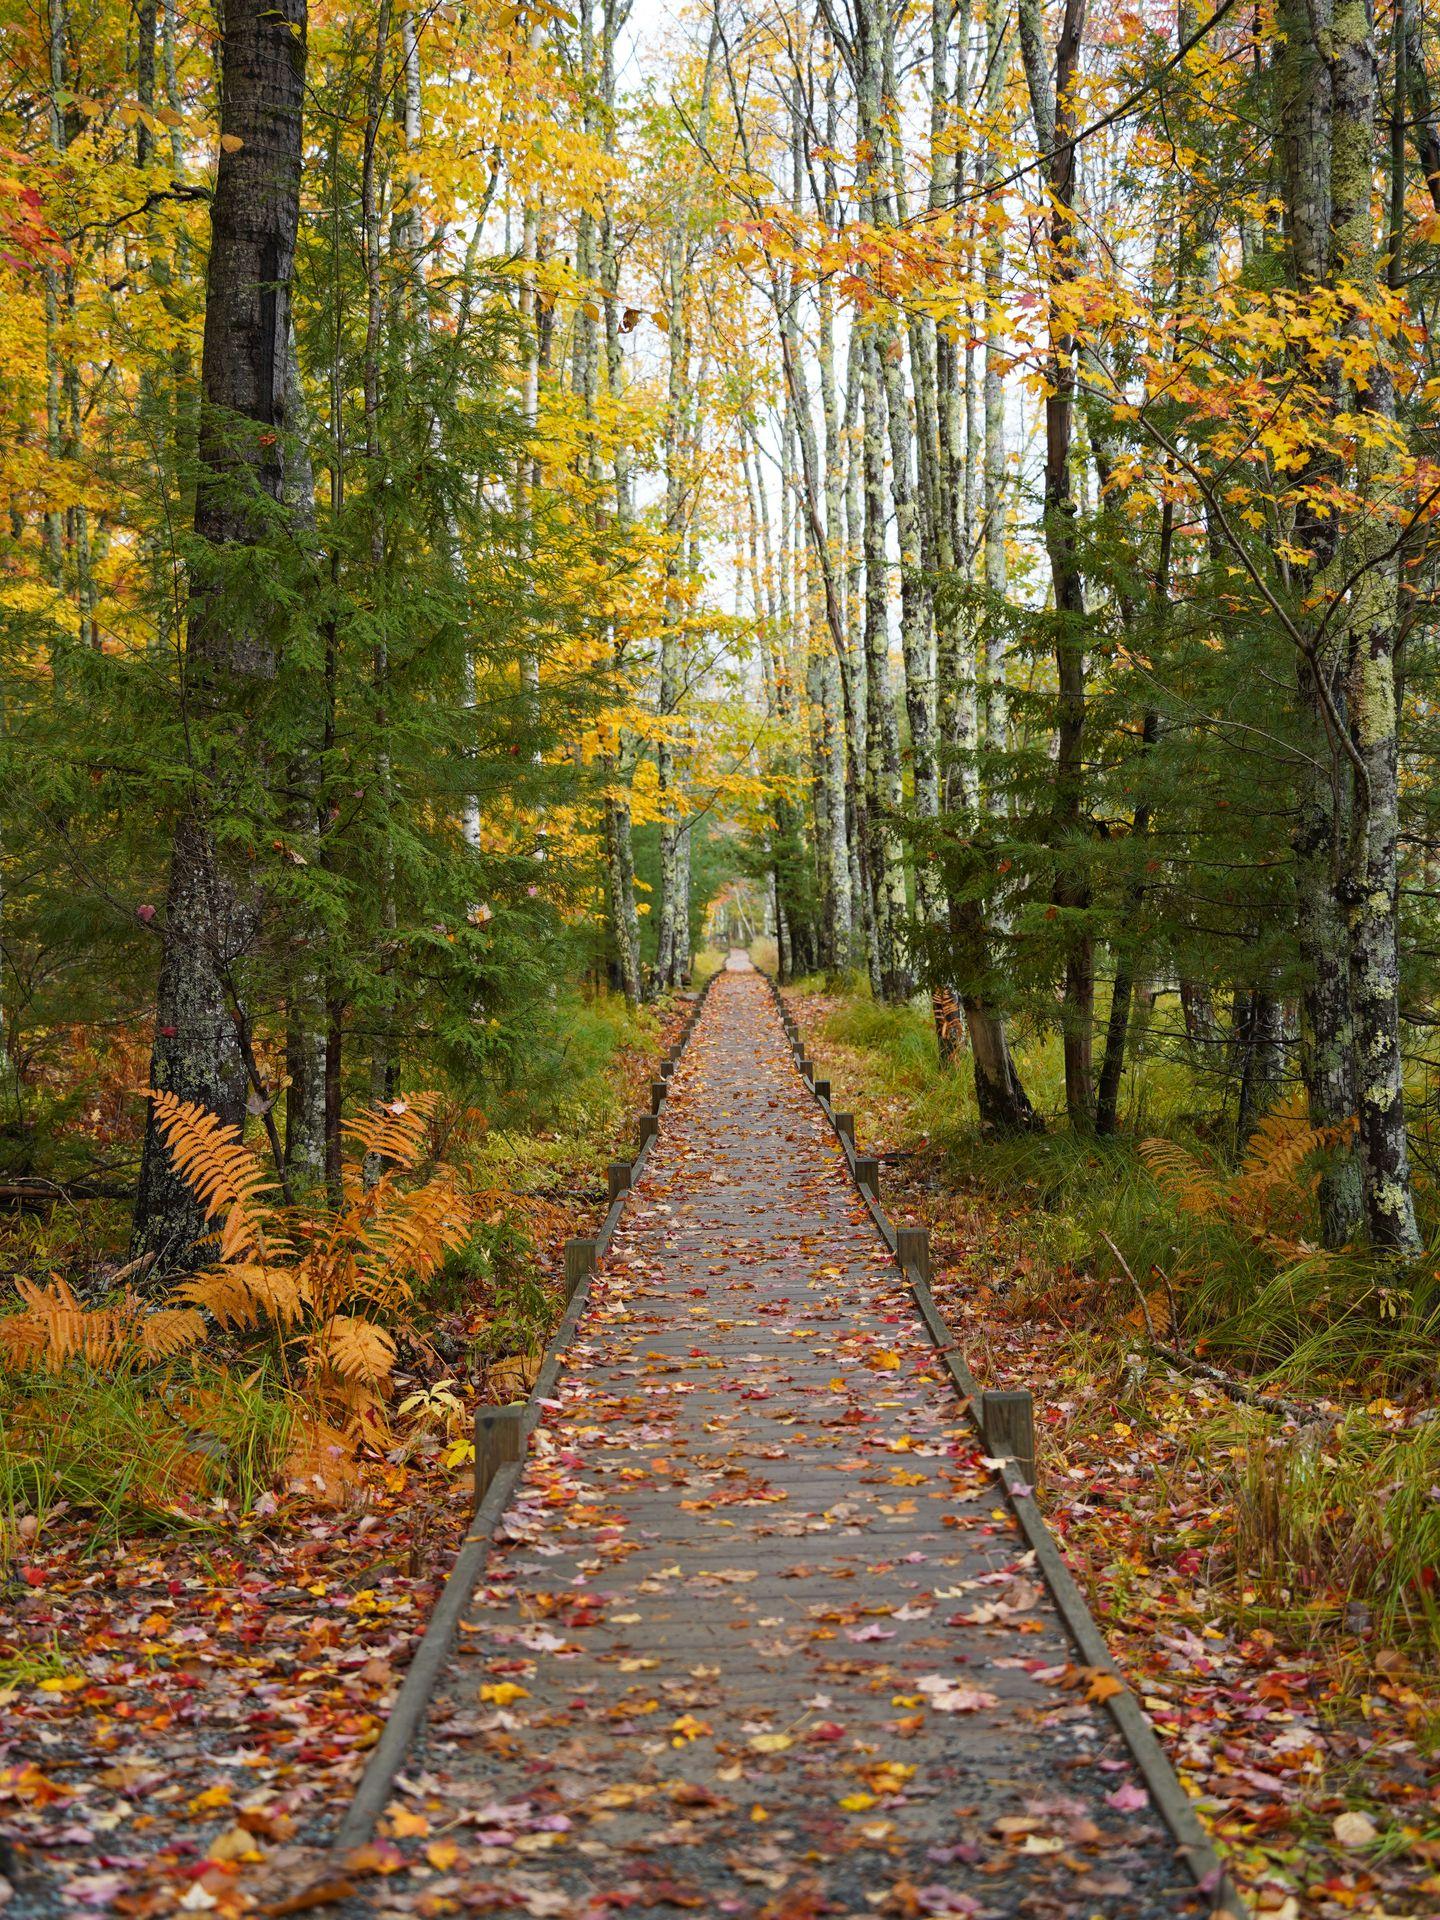 A boardwalk trail surrounded by trees and yellow foliage.